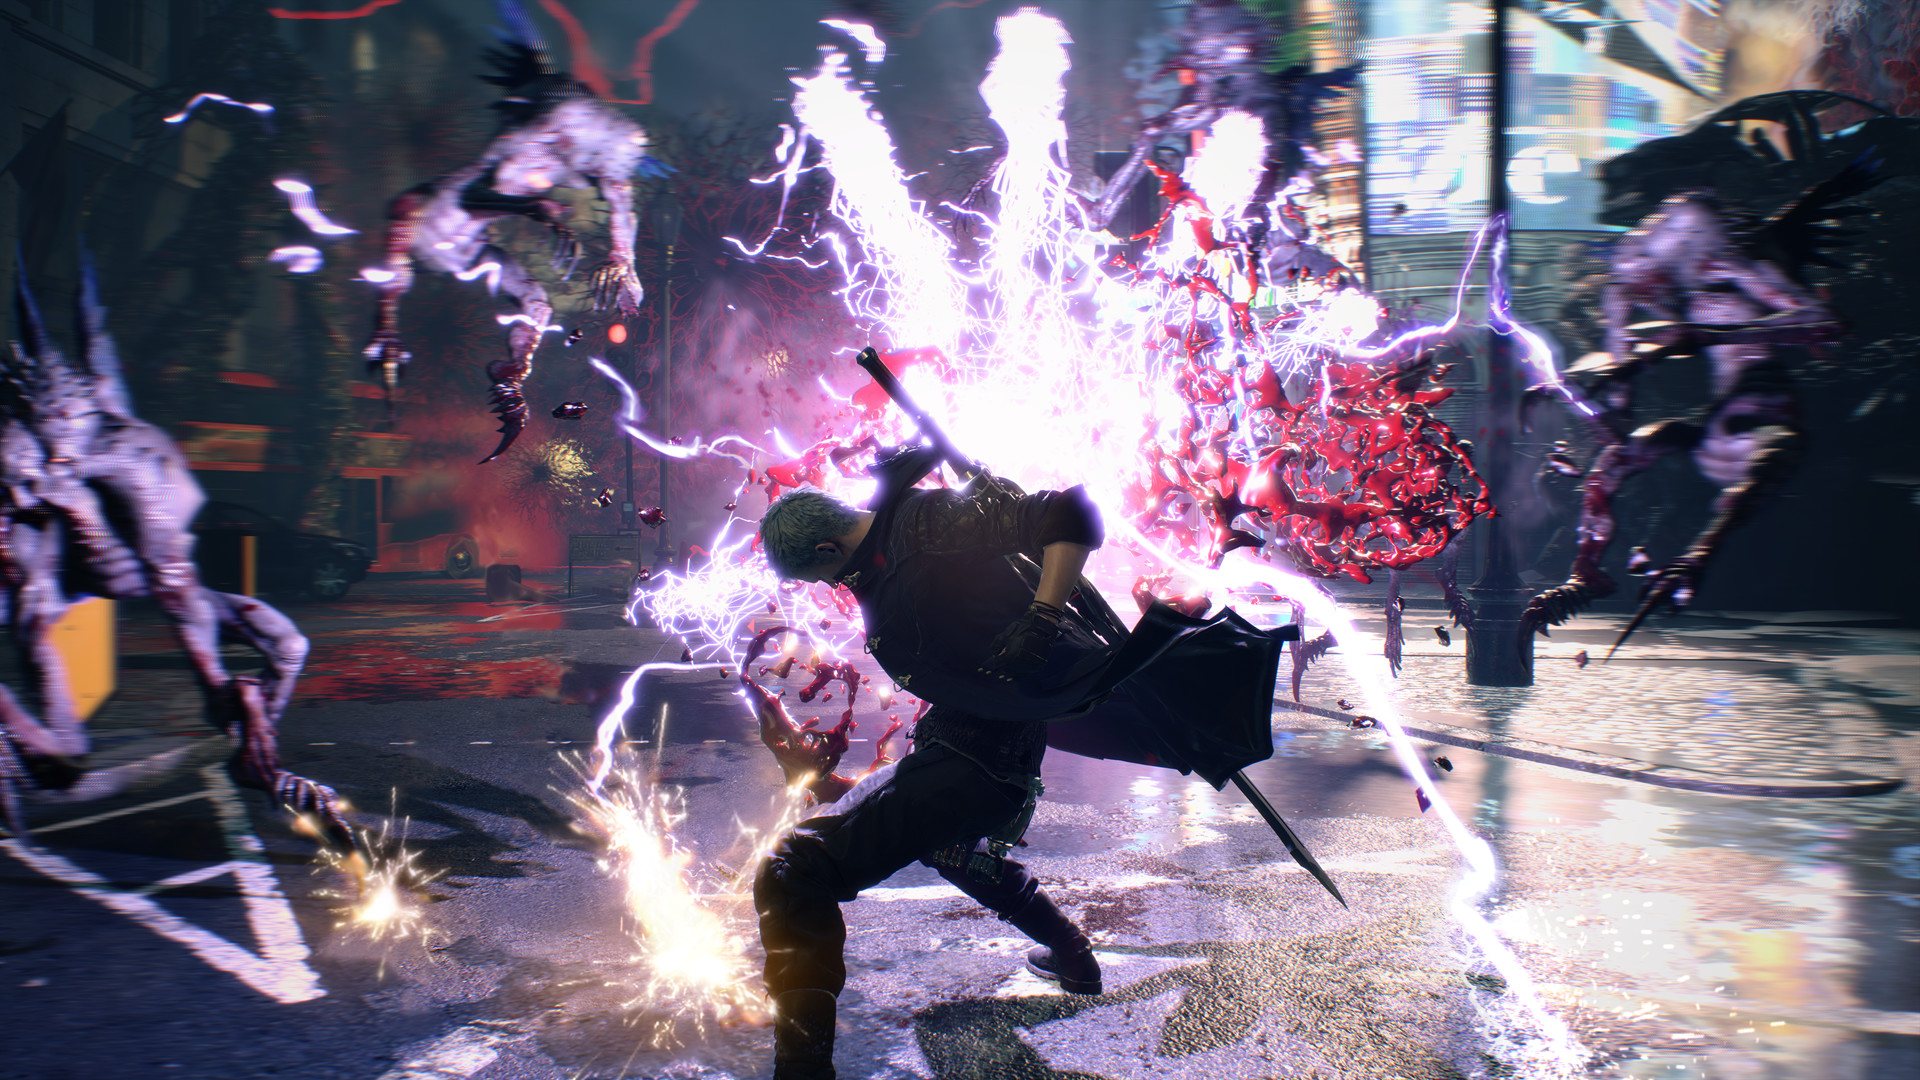 [$ 13.75] Devil May Cry 5 - Deluxe Upgrade Steam CD Key